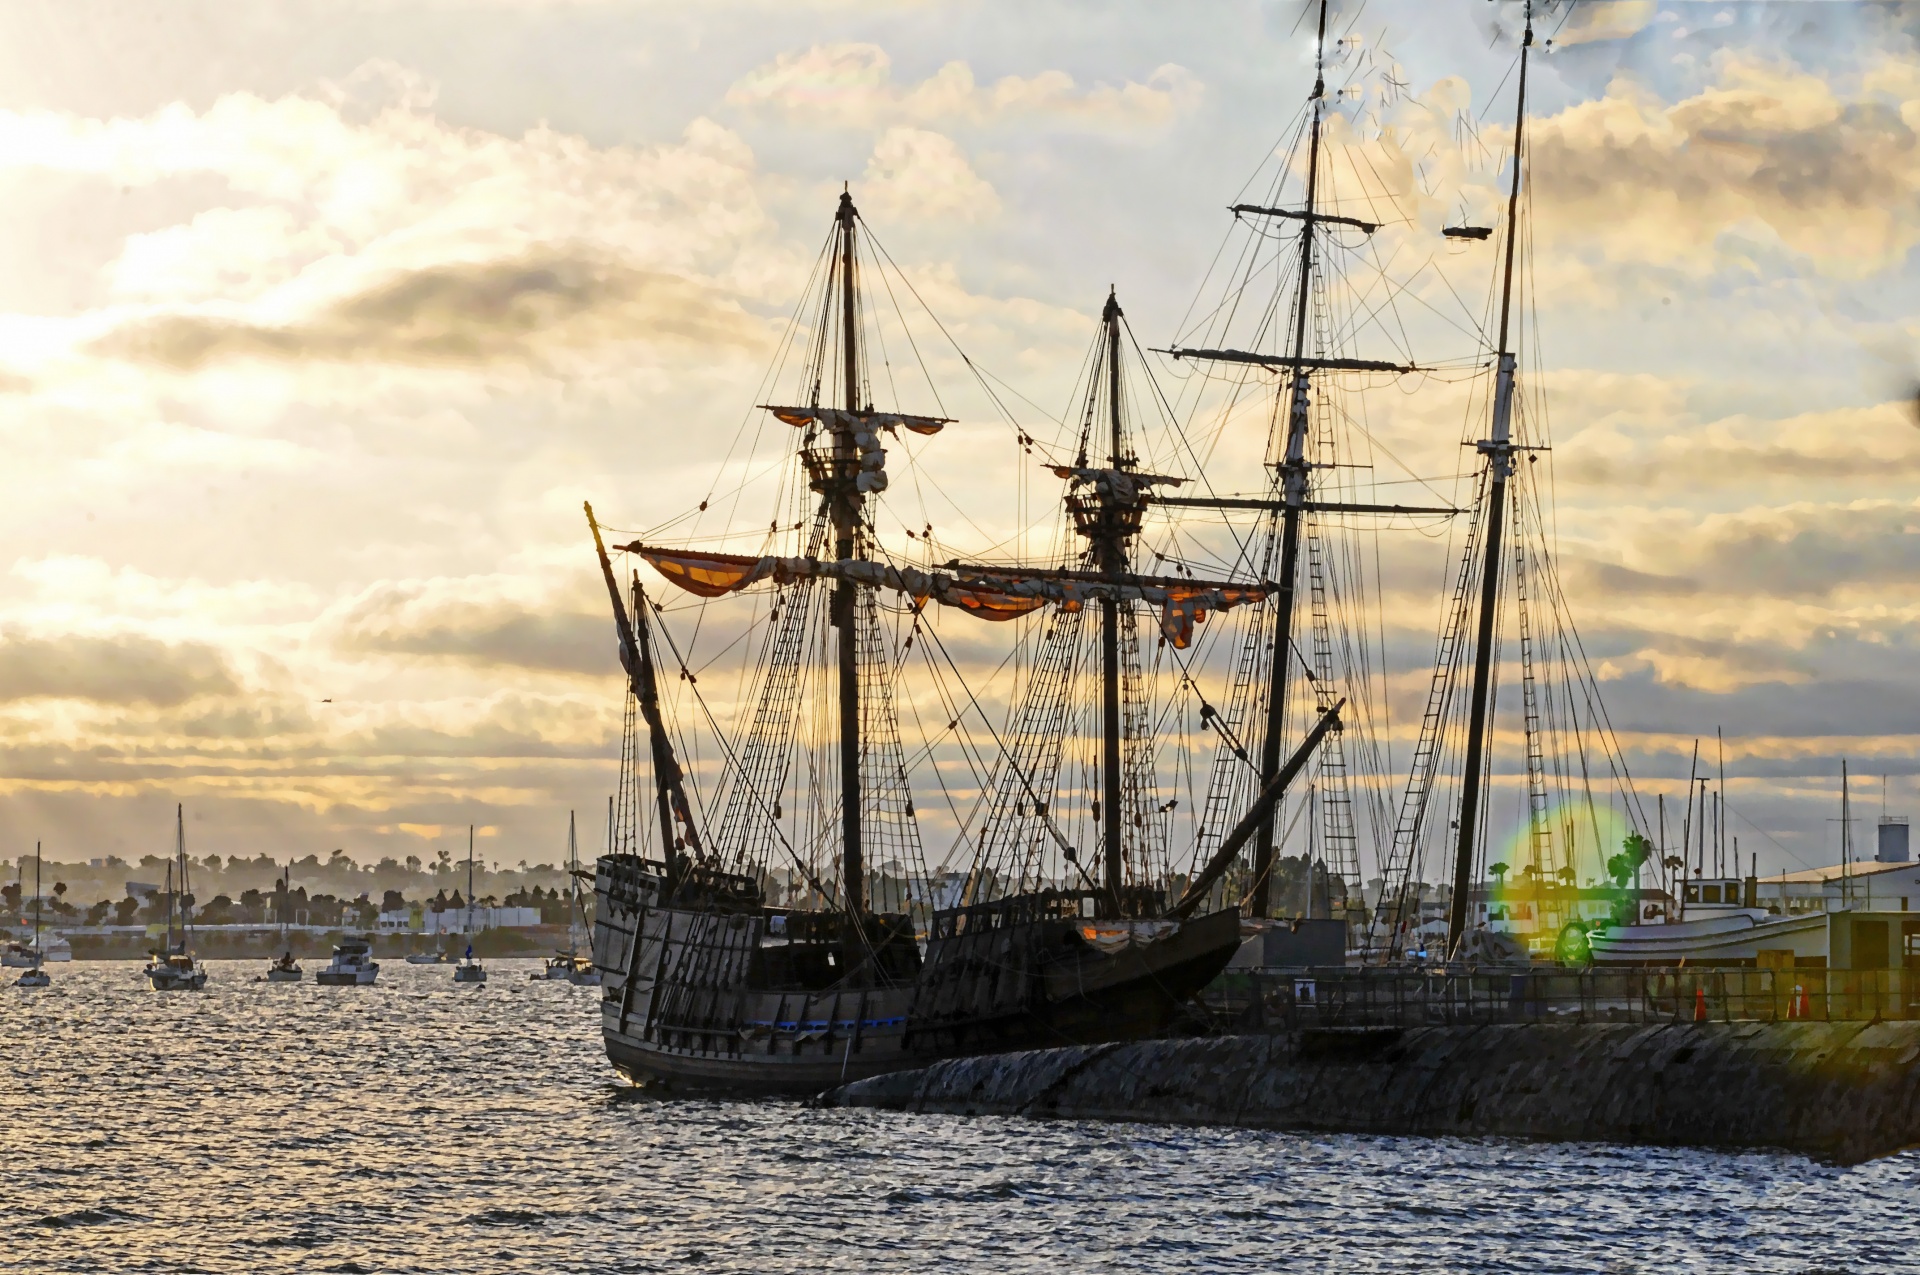 Old Sailing Ship In Sunset